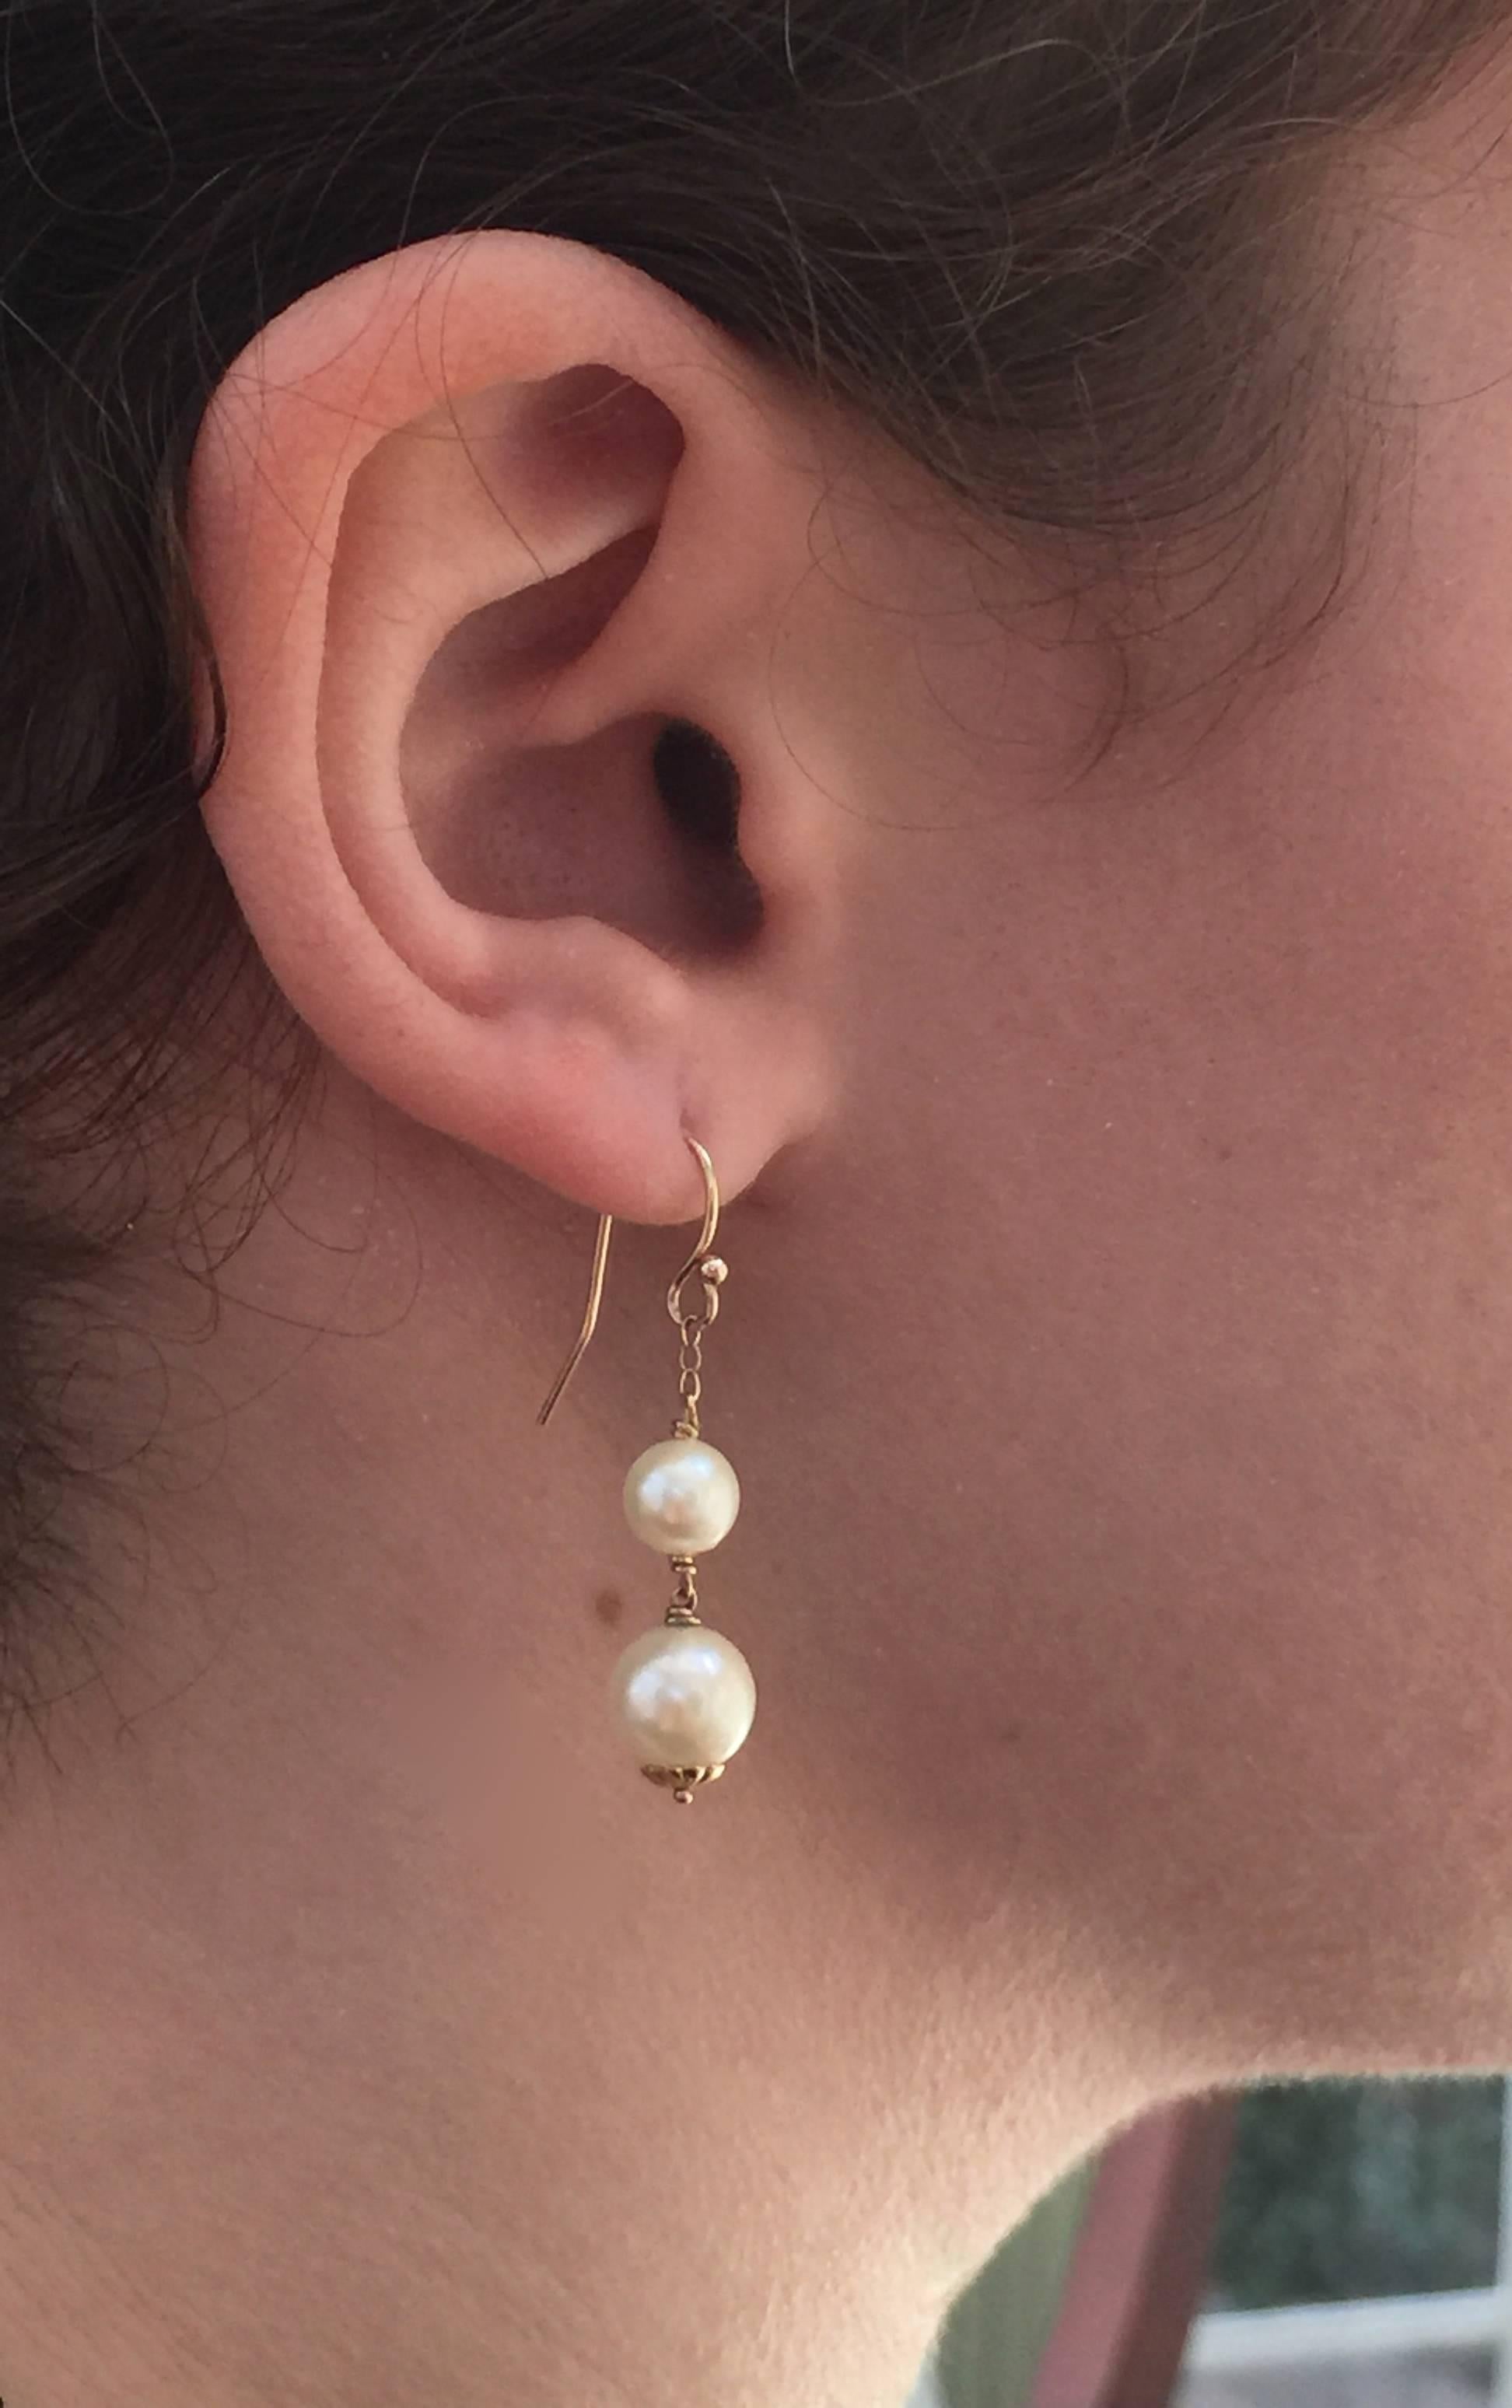 Women's Double Pearl Earrings with 14 Karat Yellow Gold Hook and Wiring by Marina J.